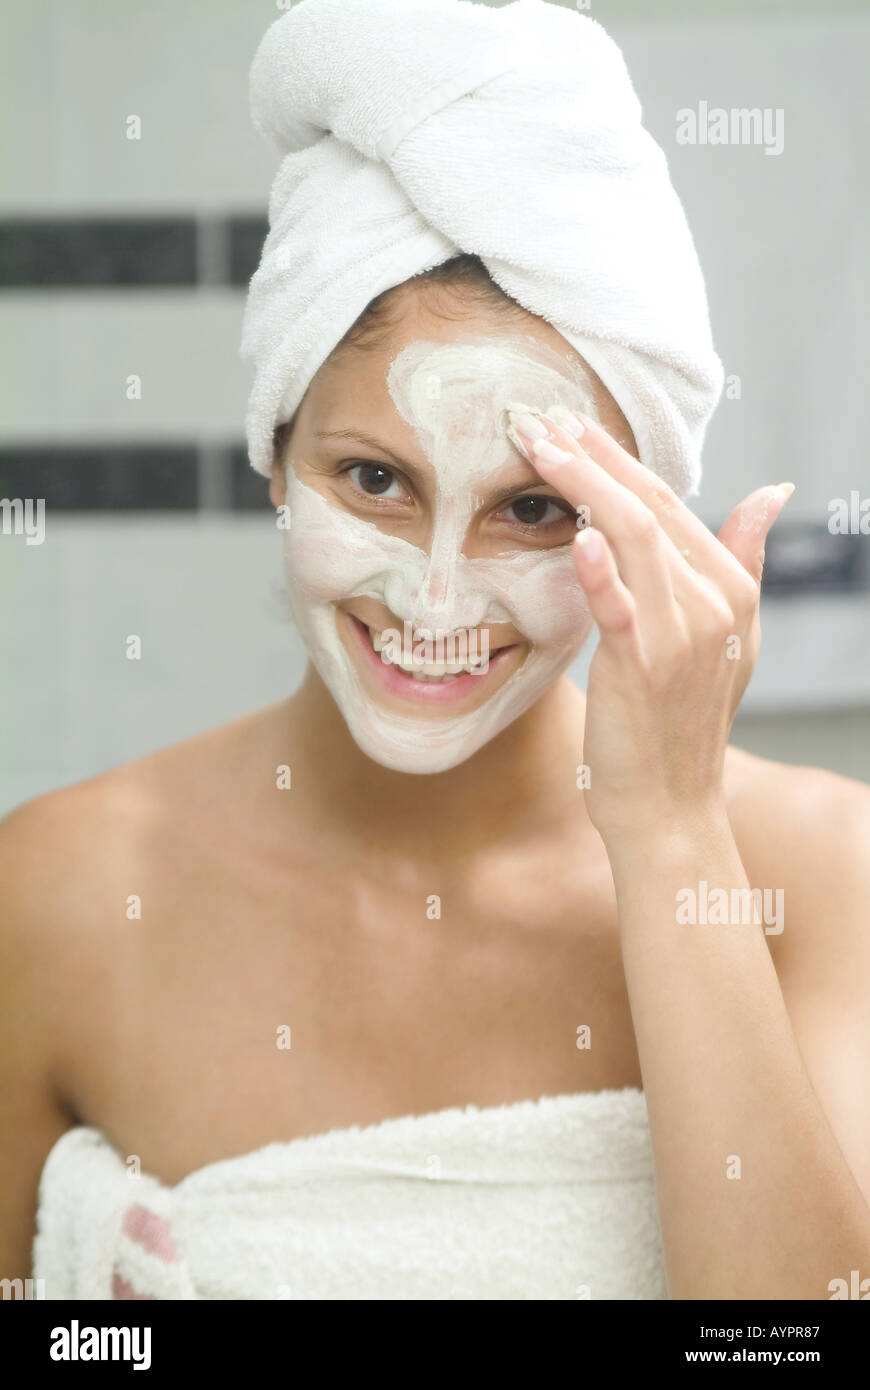 A young woman applies cream on her face as she smiles at the camera Stock Photo